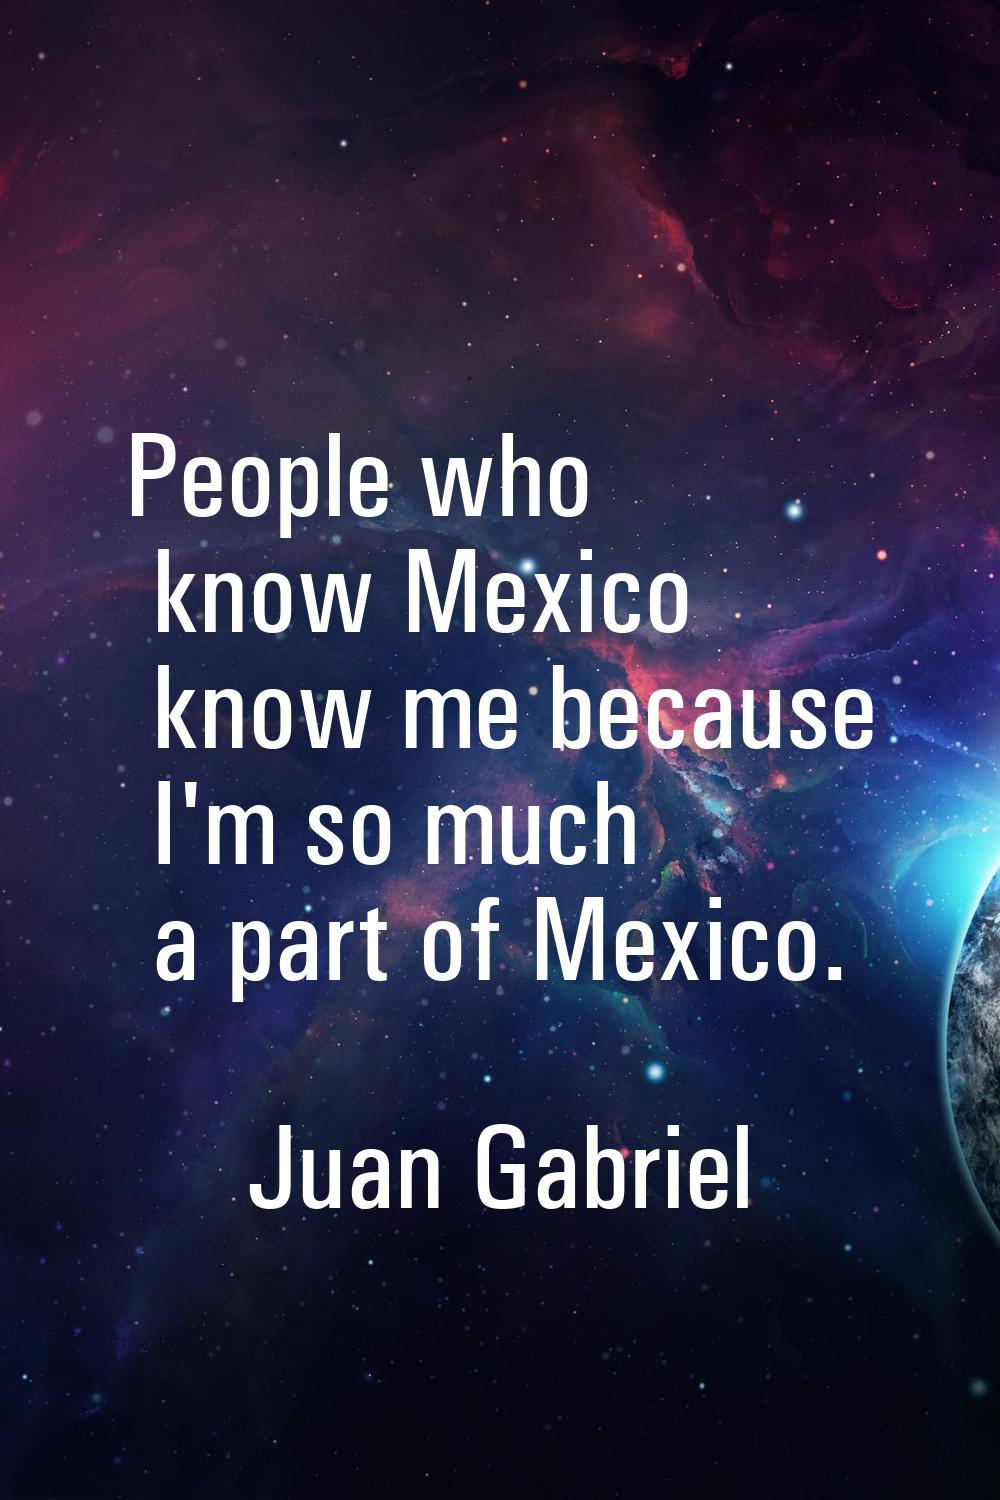 People who know Mexico know me because I'm so much a part of Mexico.